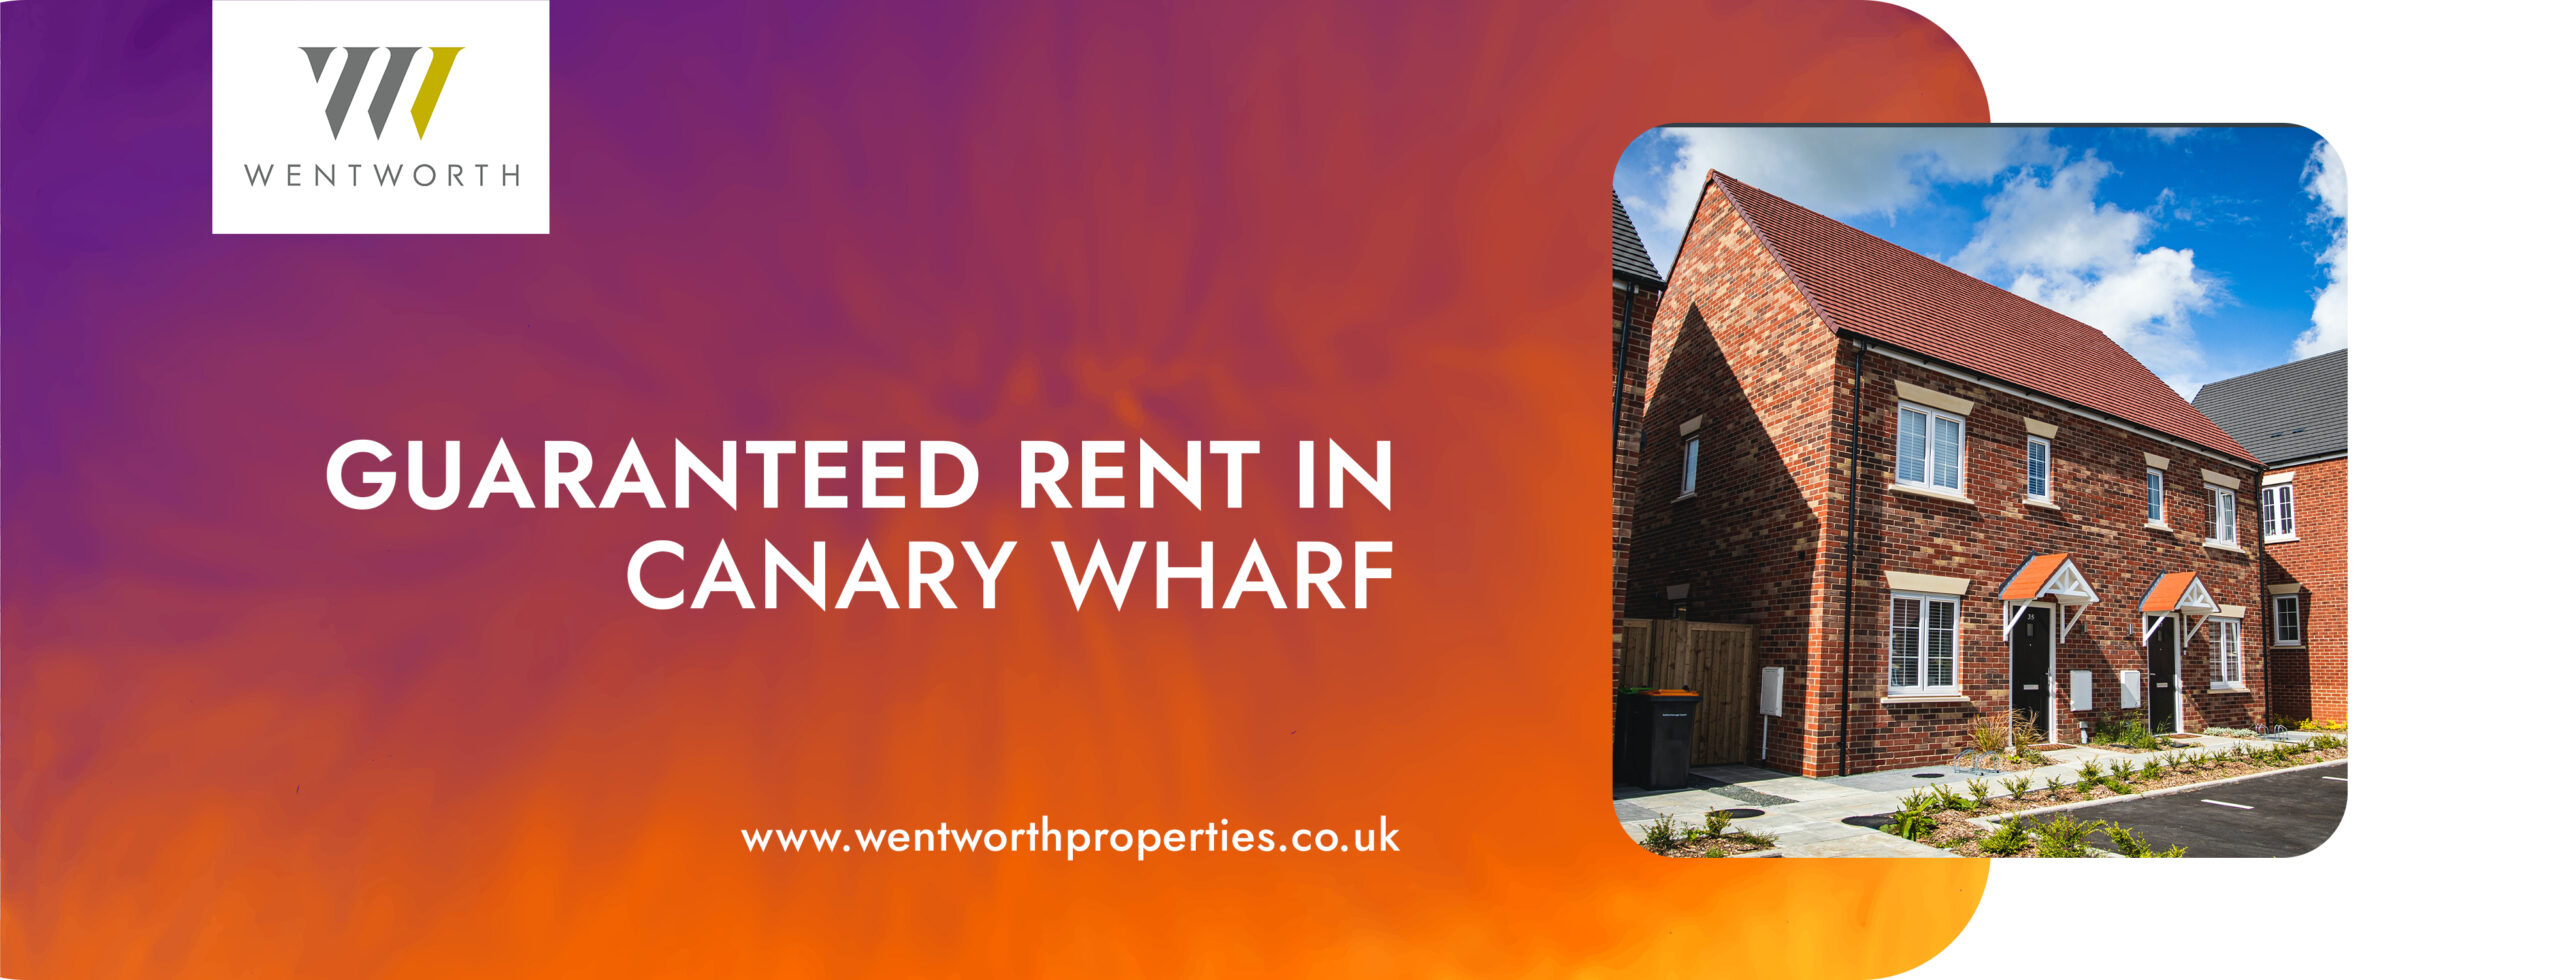 Guaranteed Rent in Canary Wharf